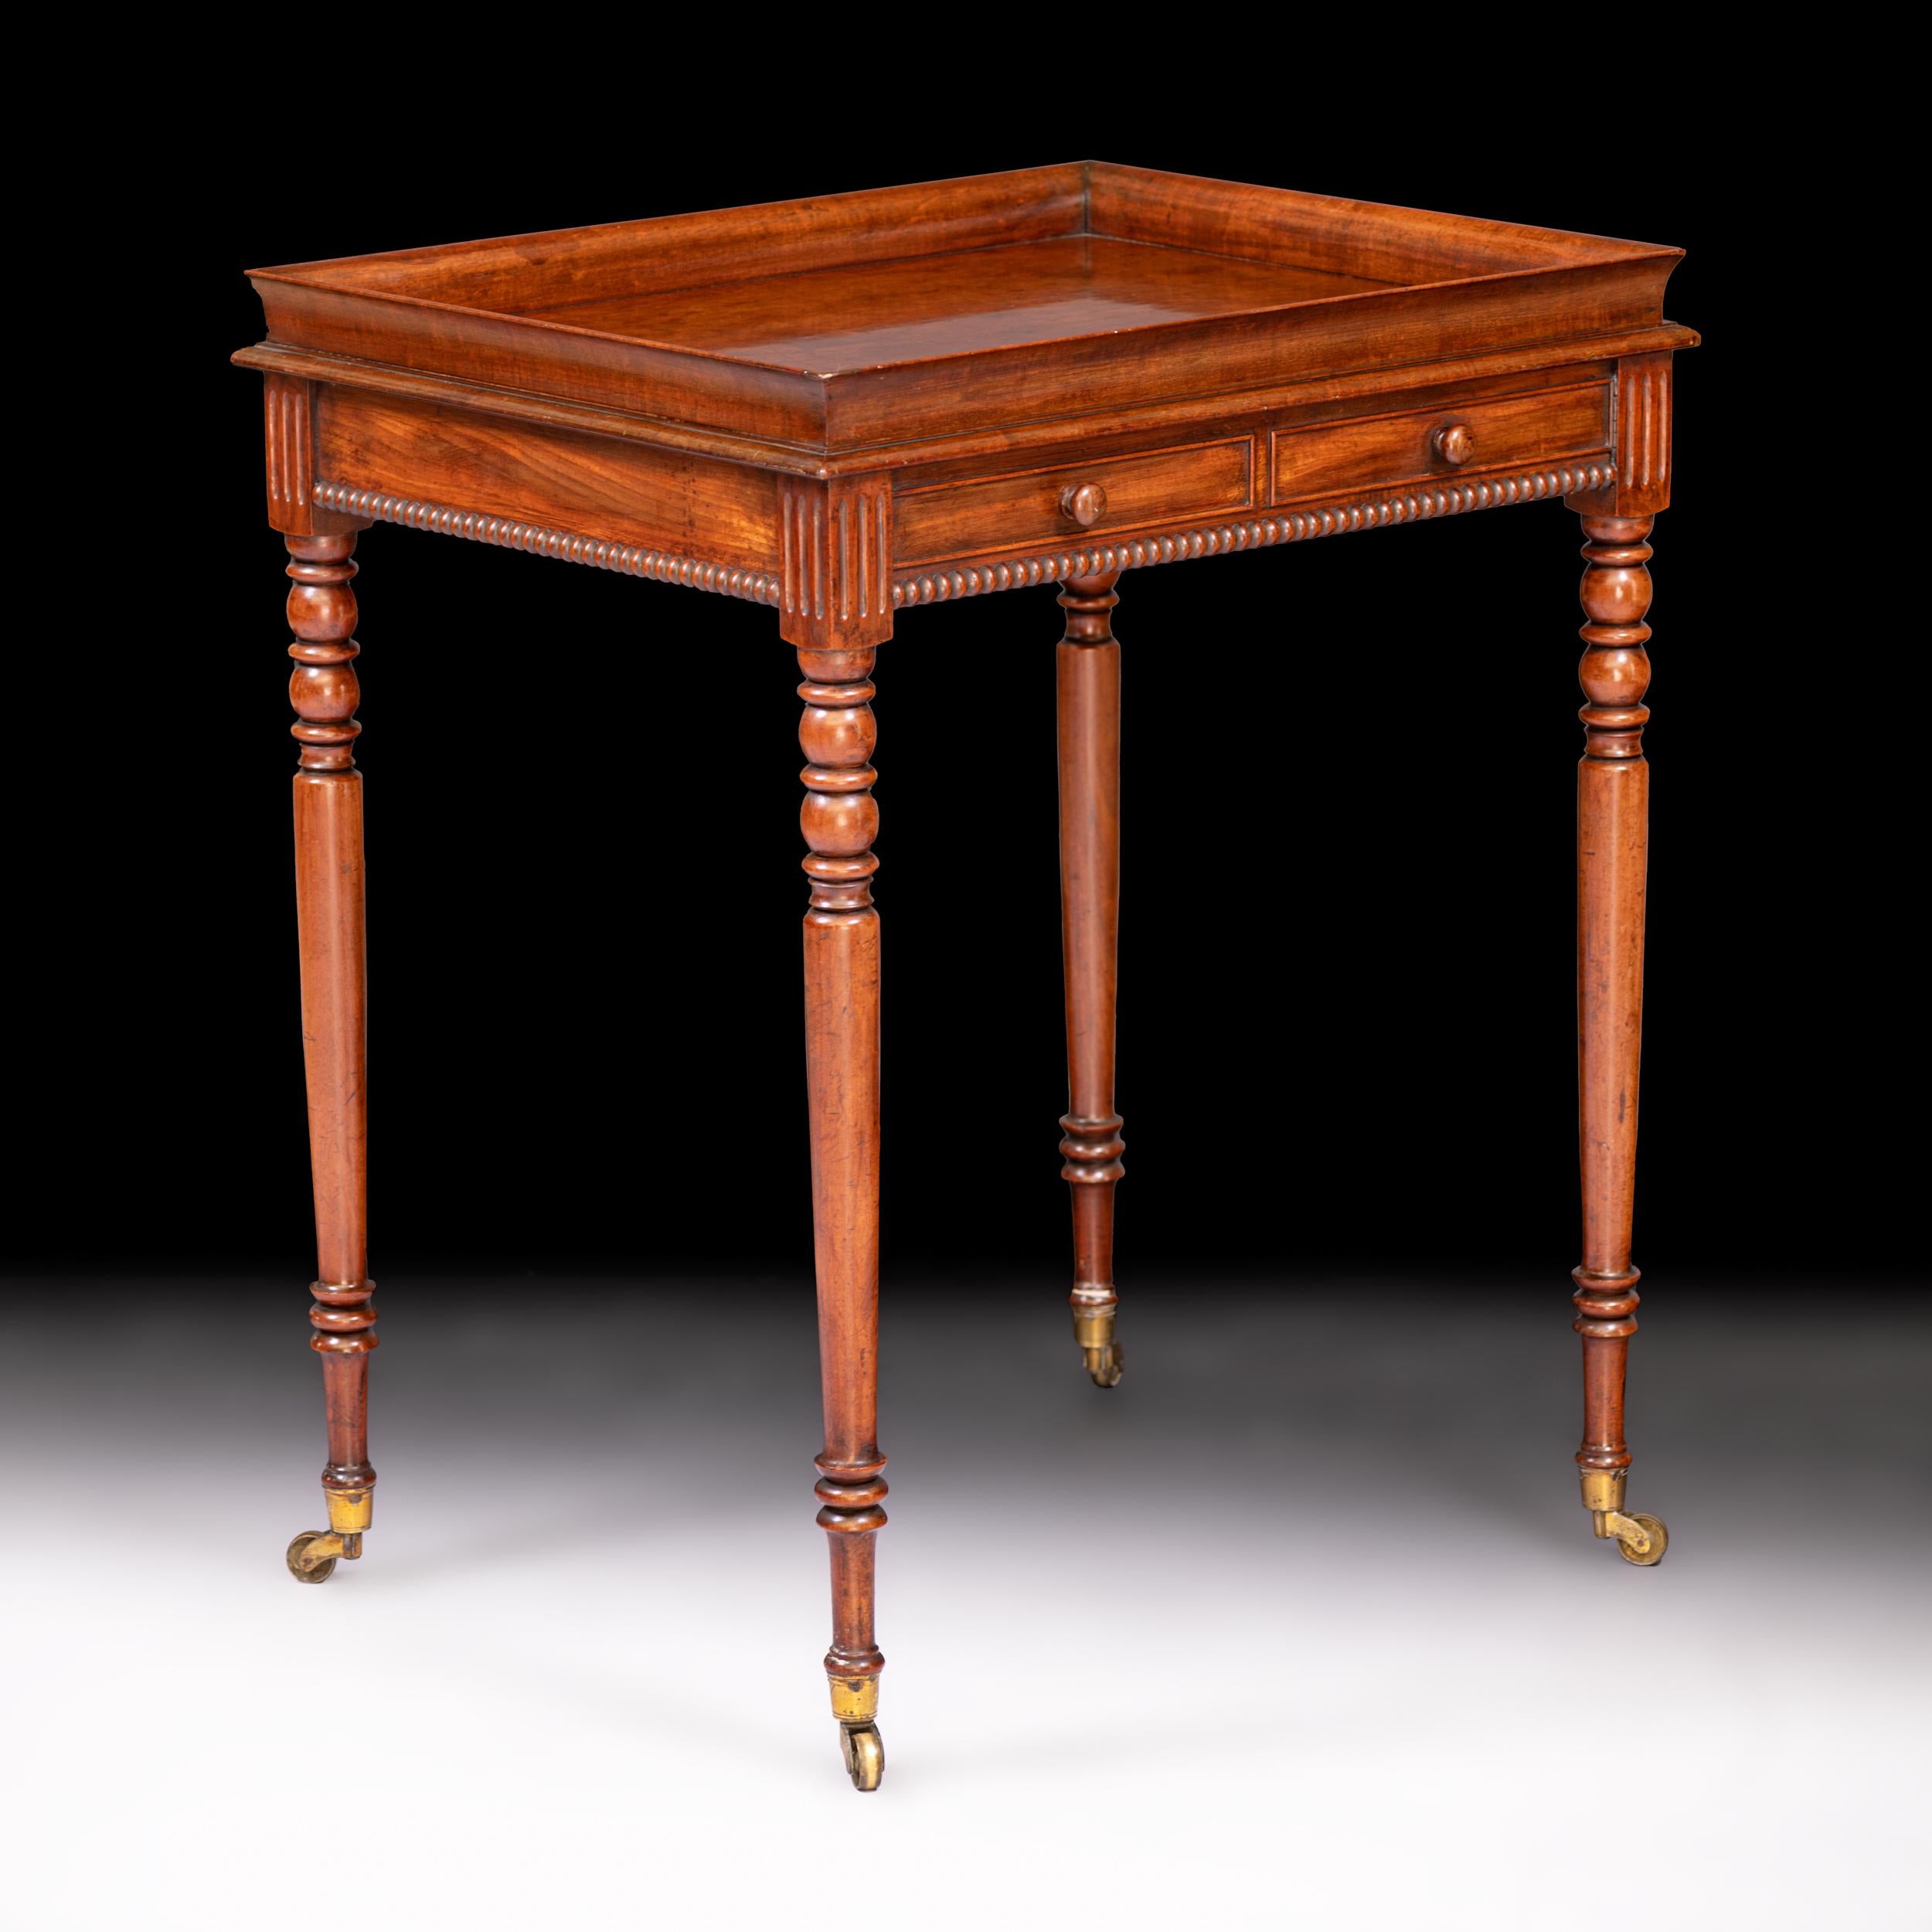 A fine Regency mahogany occasional table attributed to Gillows of Lancaster, with tray top above frieze drawers and beaded border, on turned tapering legs with castors.

Circa 1828

English